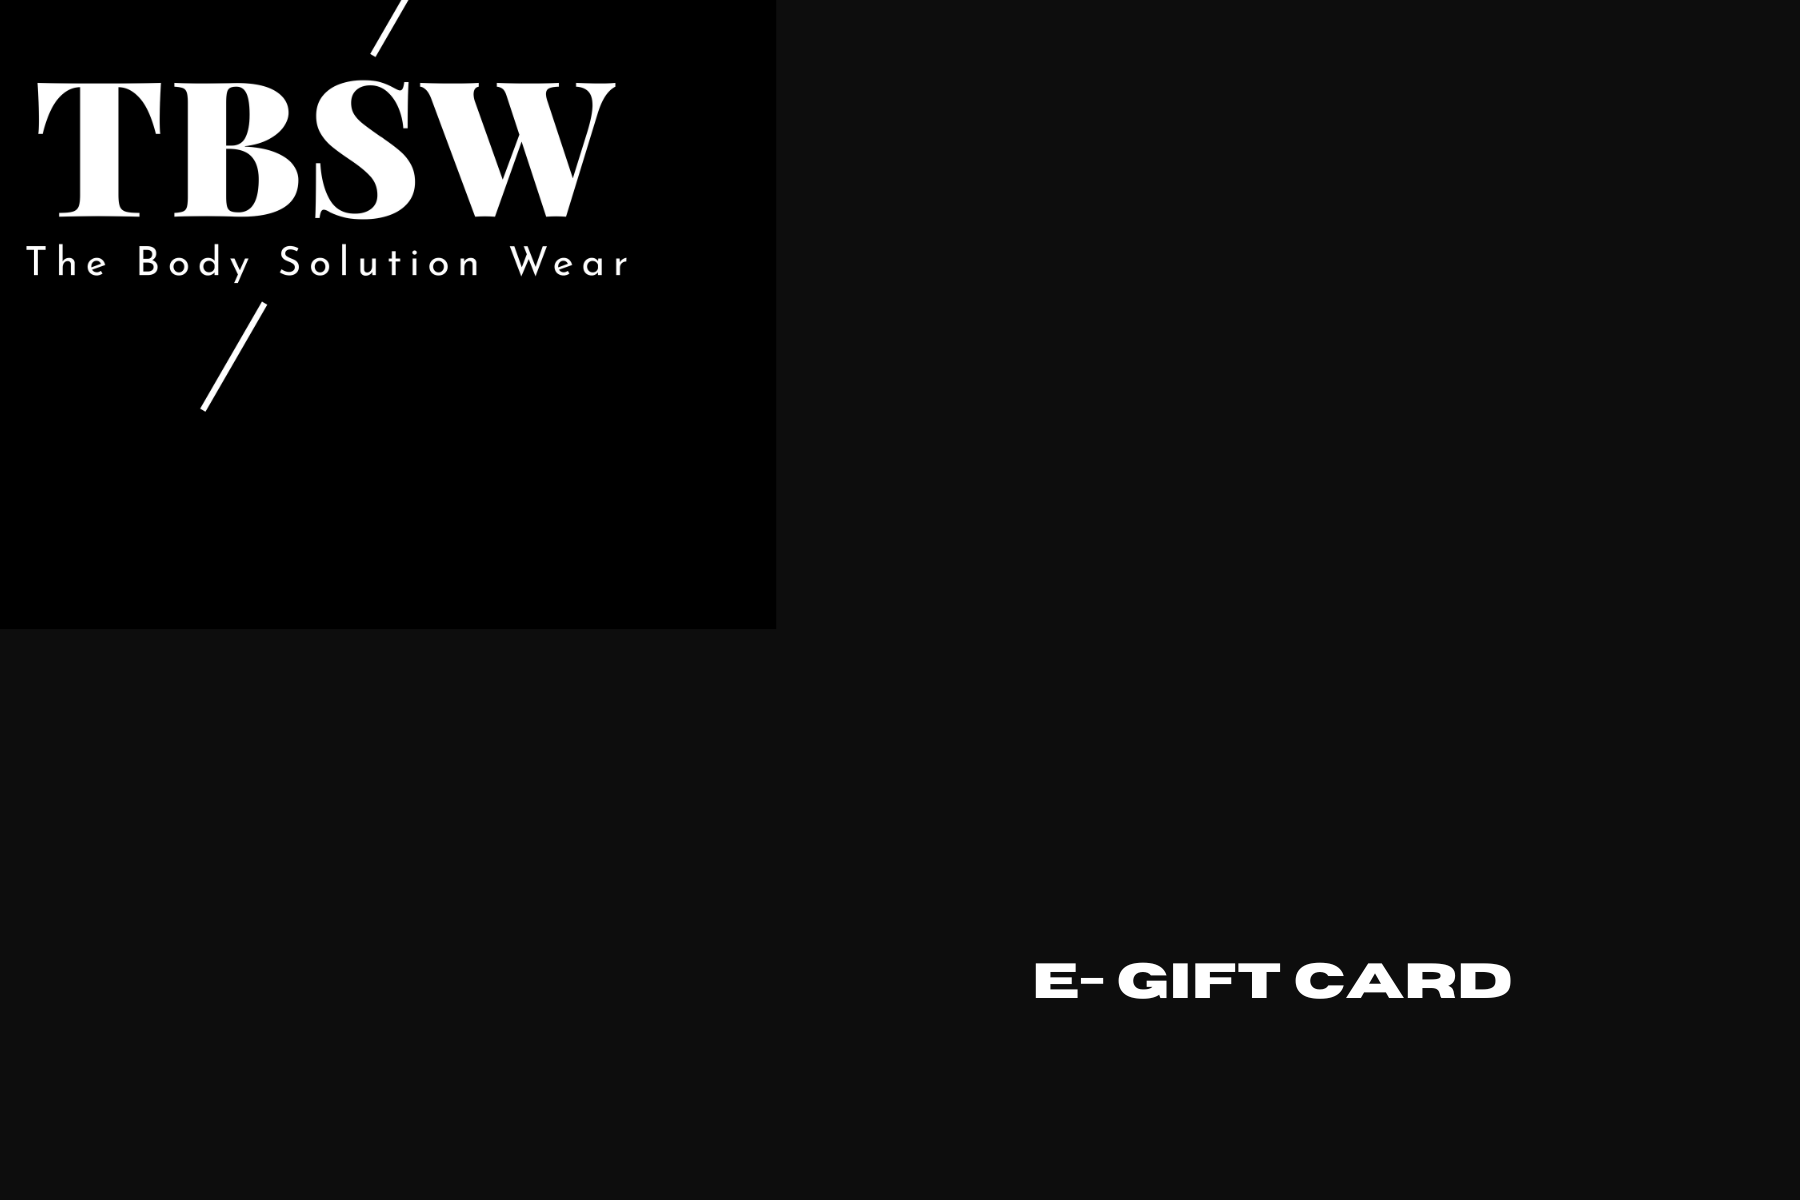 £350 GIFT CARD - TBSW